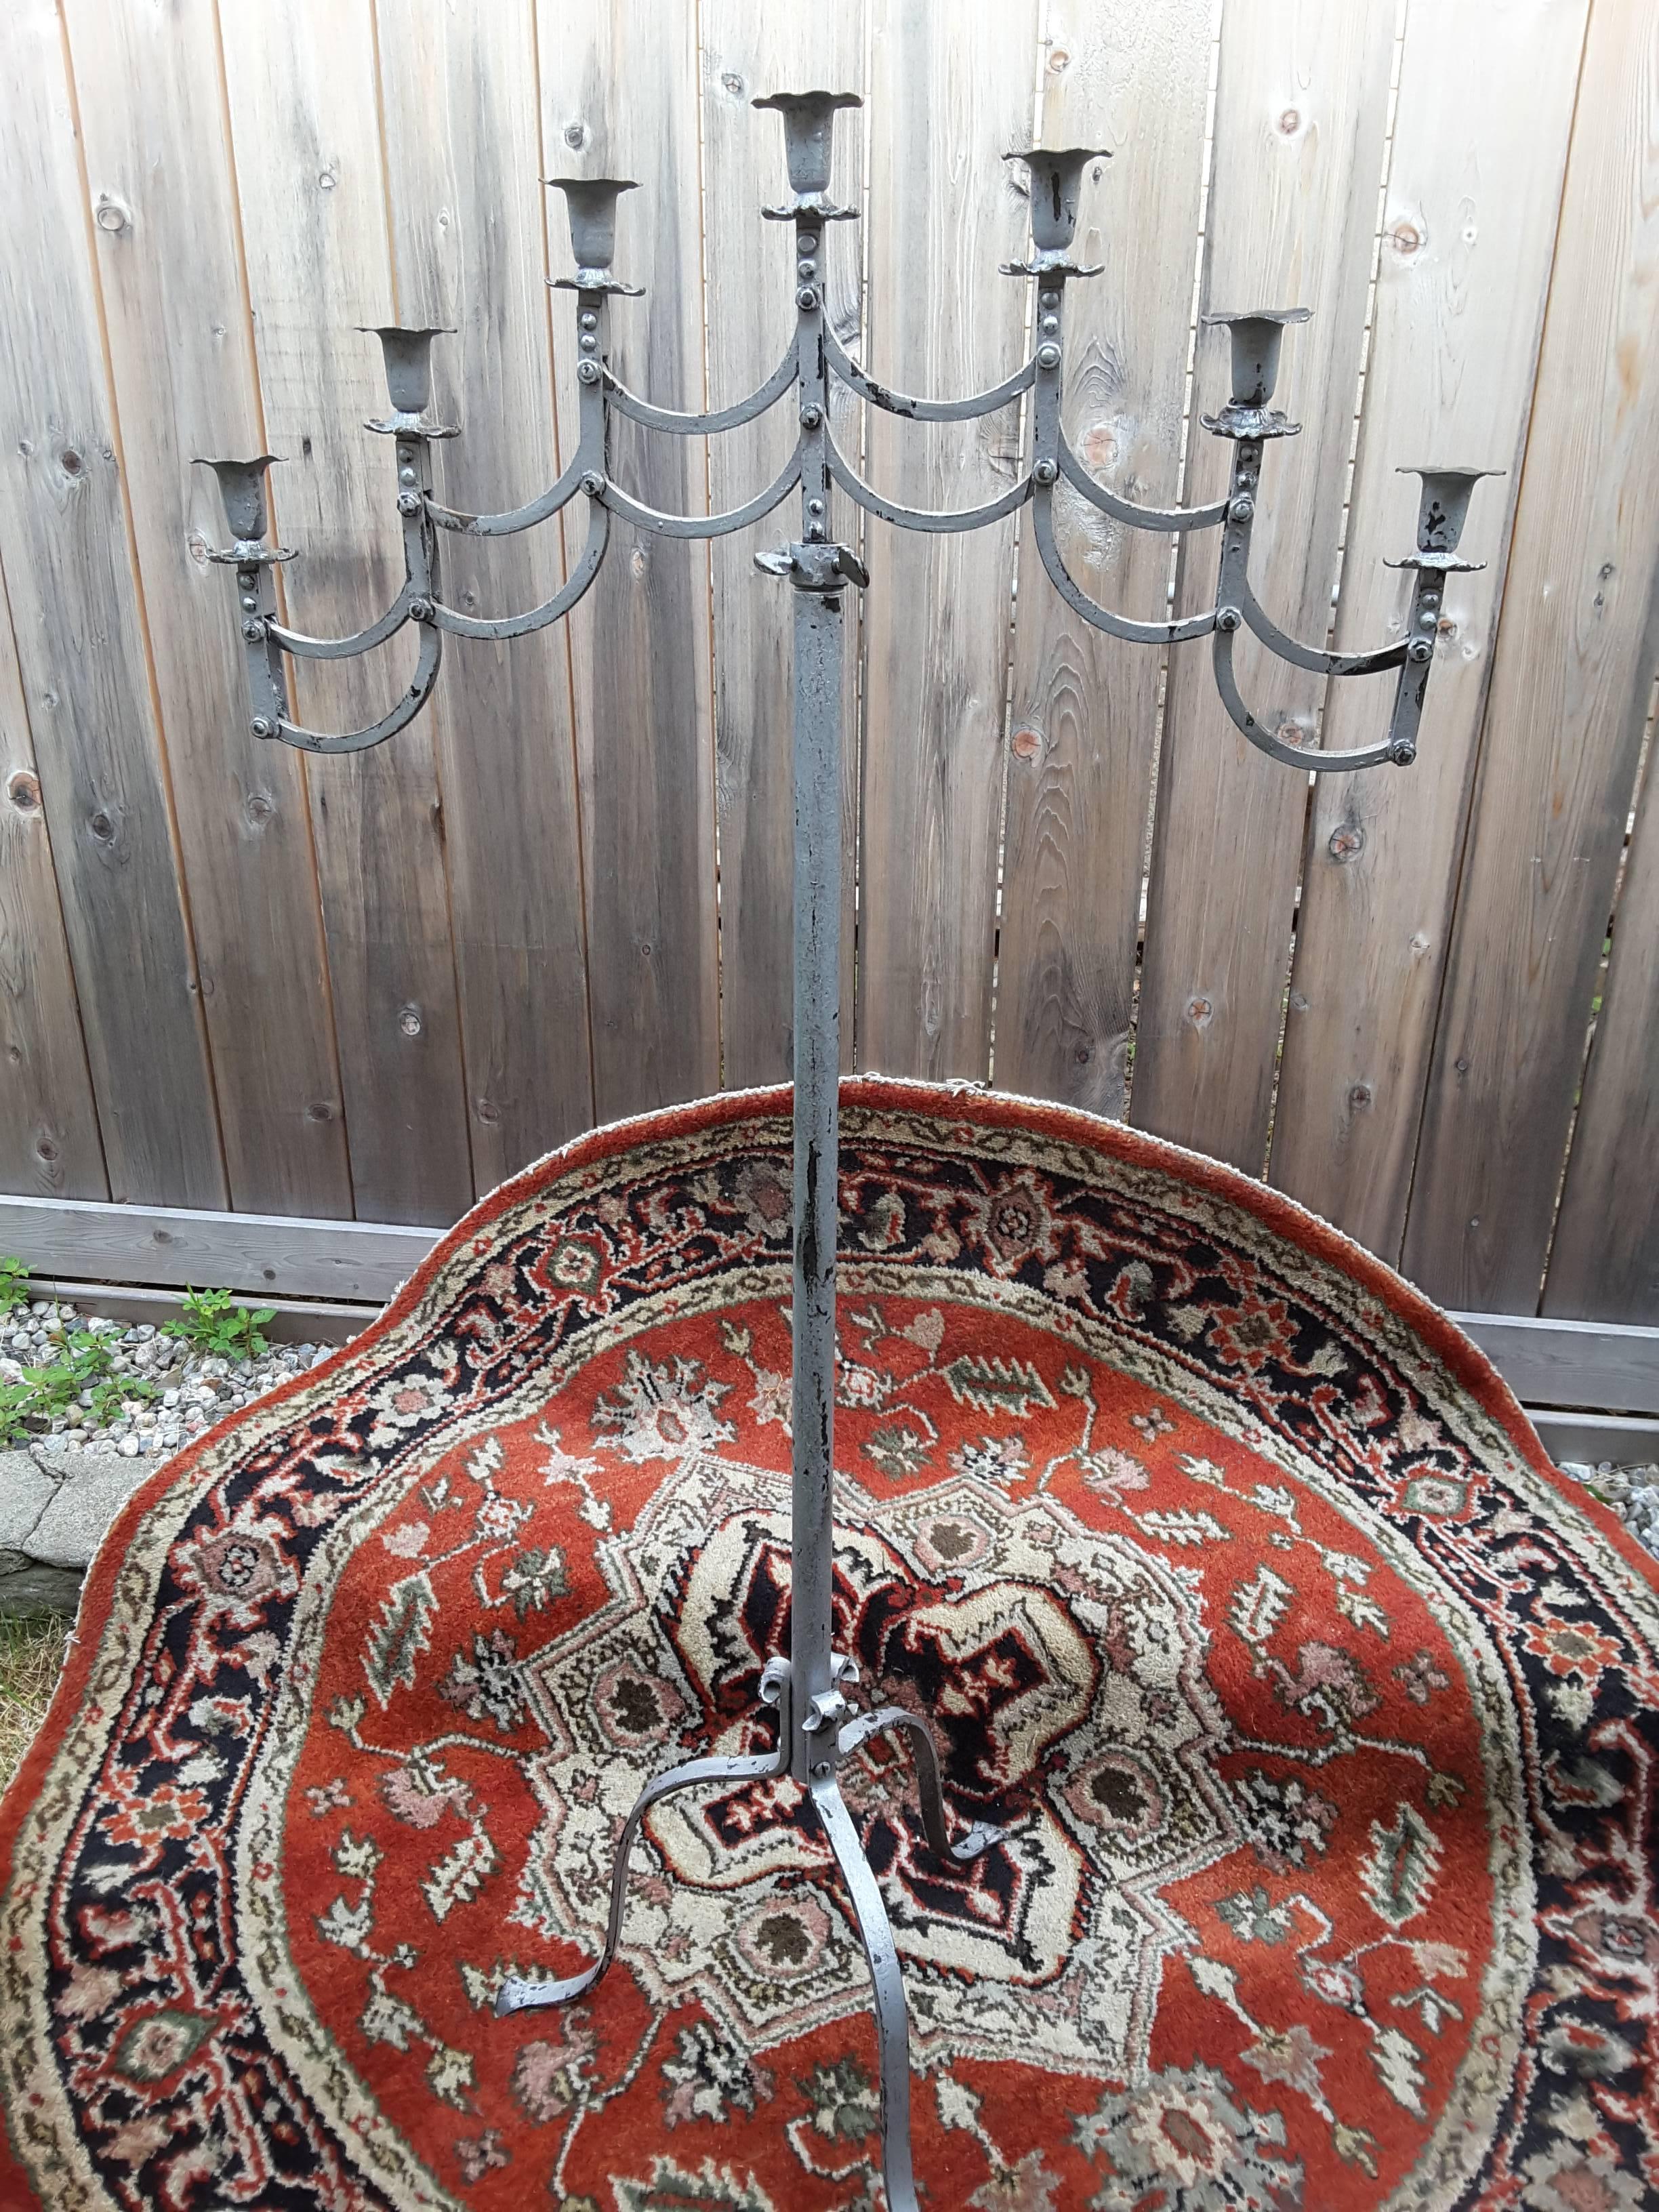 Wrought Iron Candelabra with Adjustable Height and Articulated Seven-Arm Holder 1